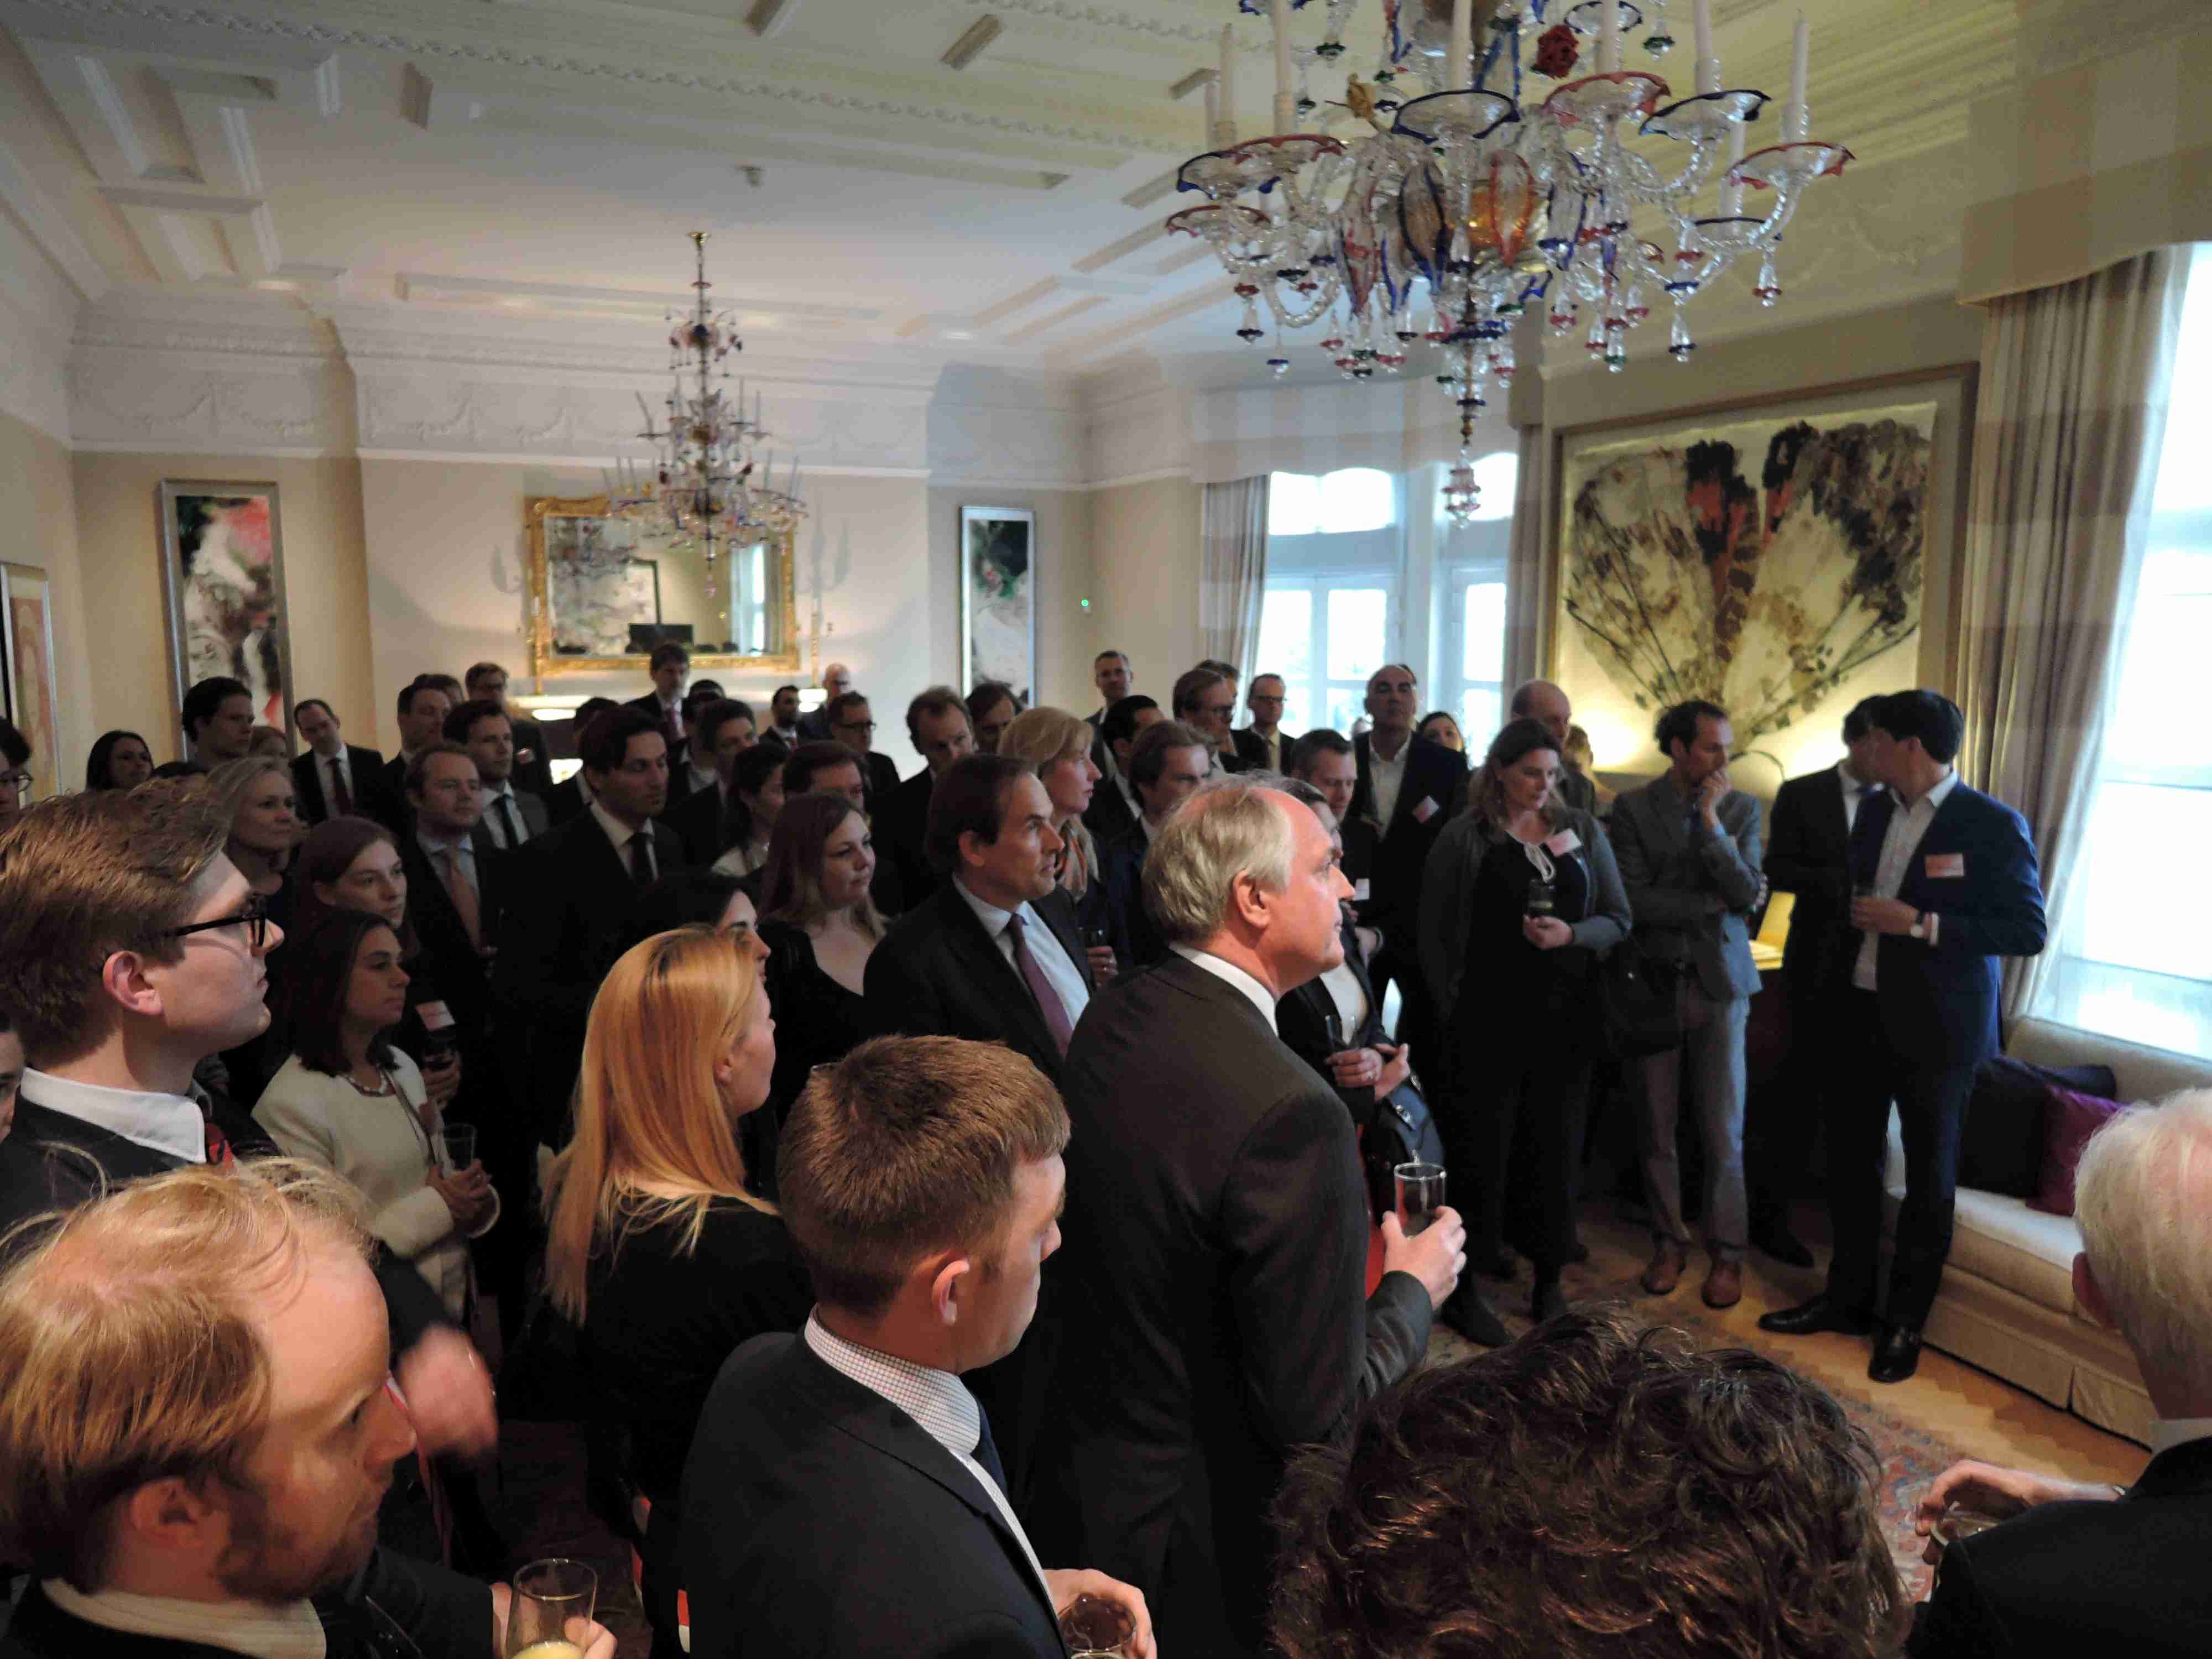 Launch event at the residence of the Dutch ambassador, 18 April 2017